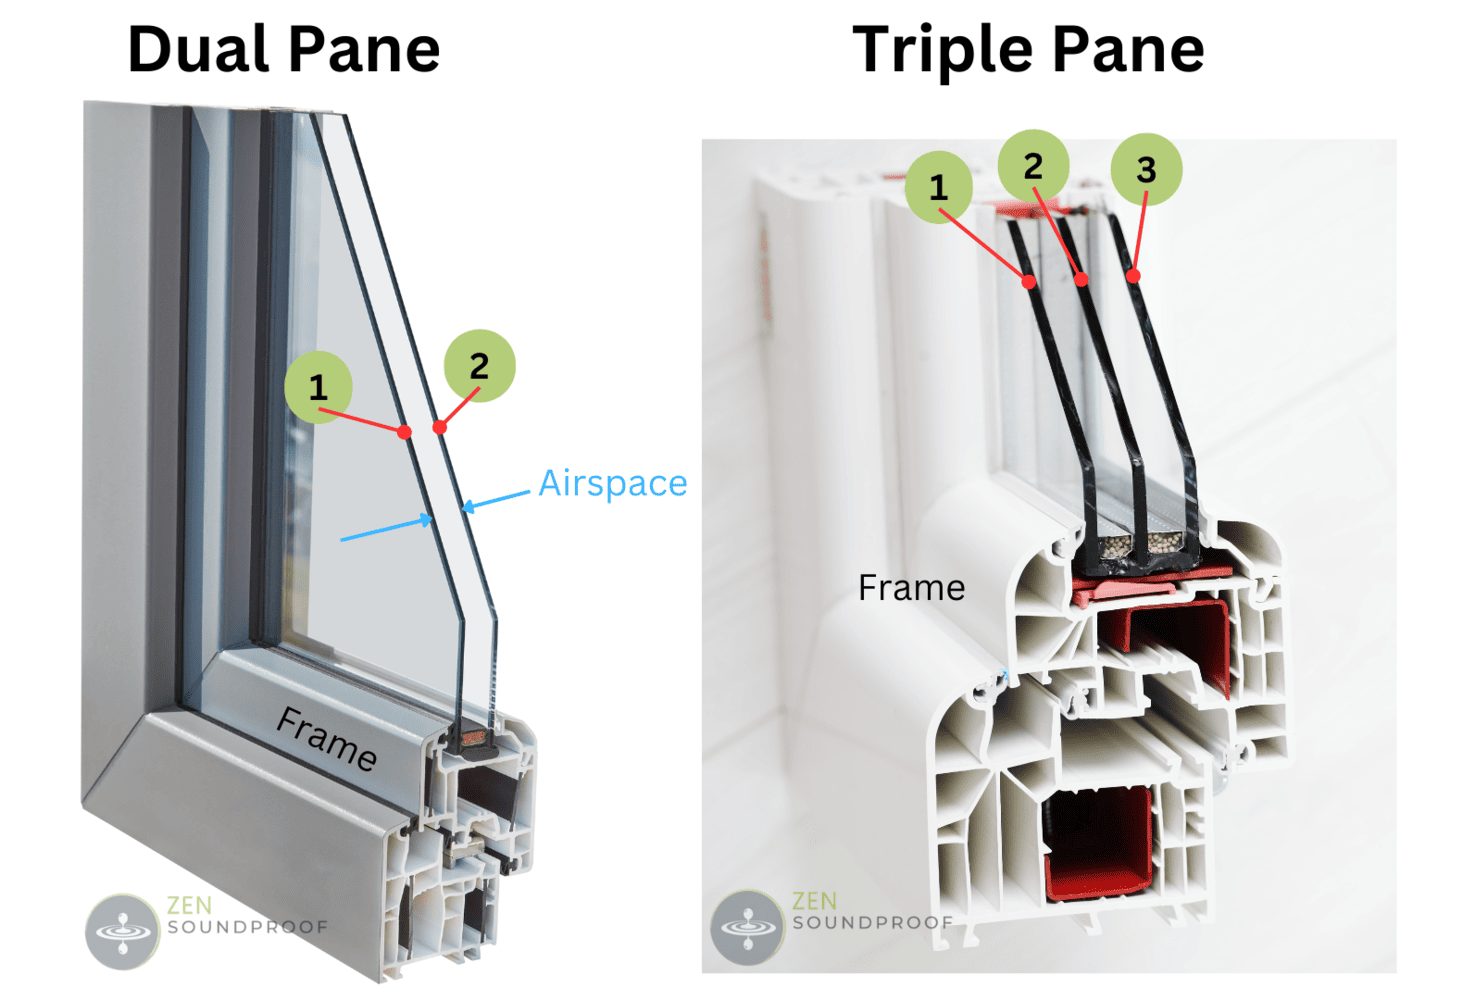 Side by side view of a dual pane and triple pane window